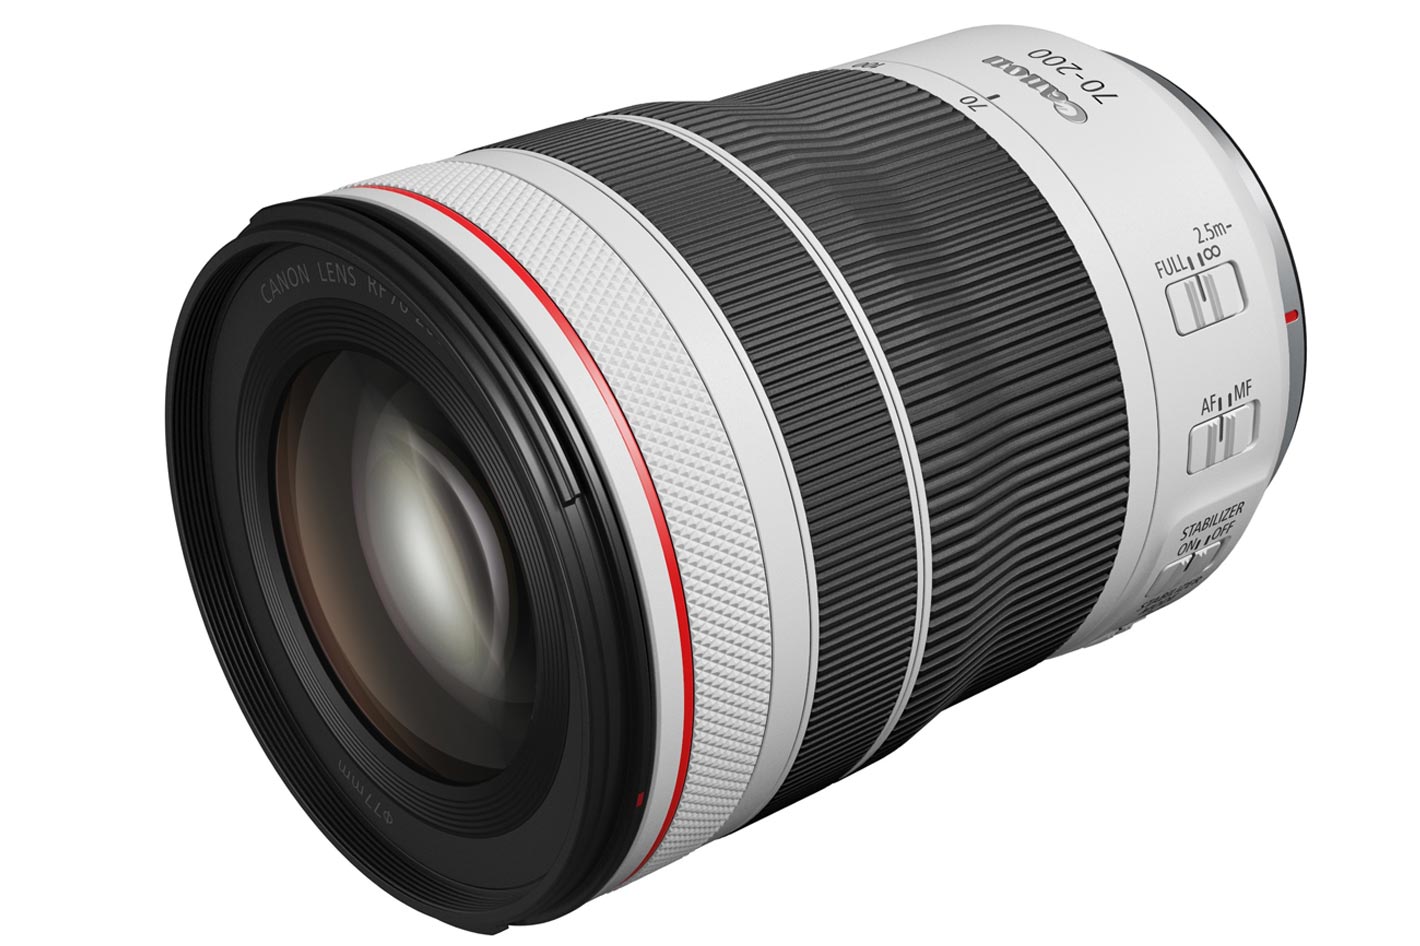 Canon RF 70-200mm F4L IS USM: world’s shortest and lightest f/4 lens